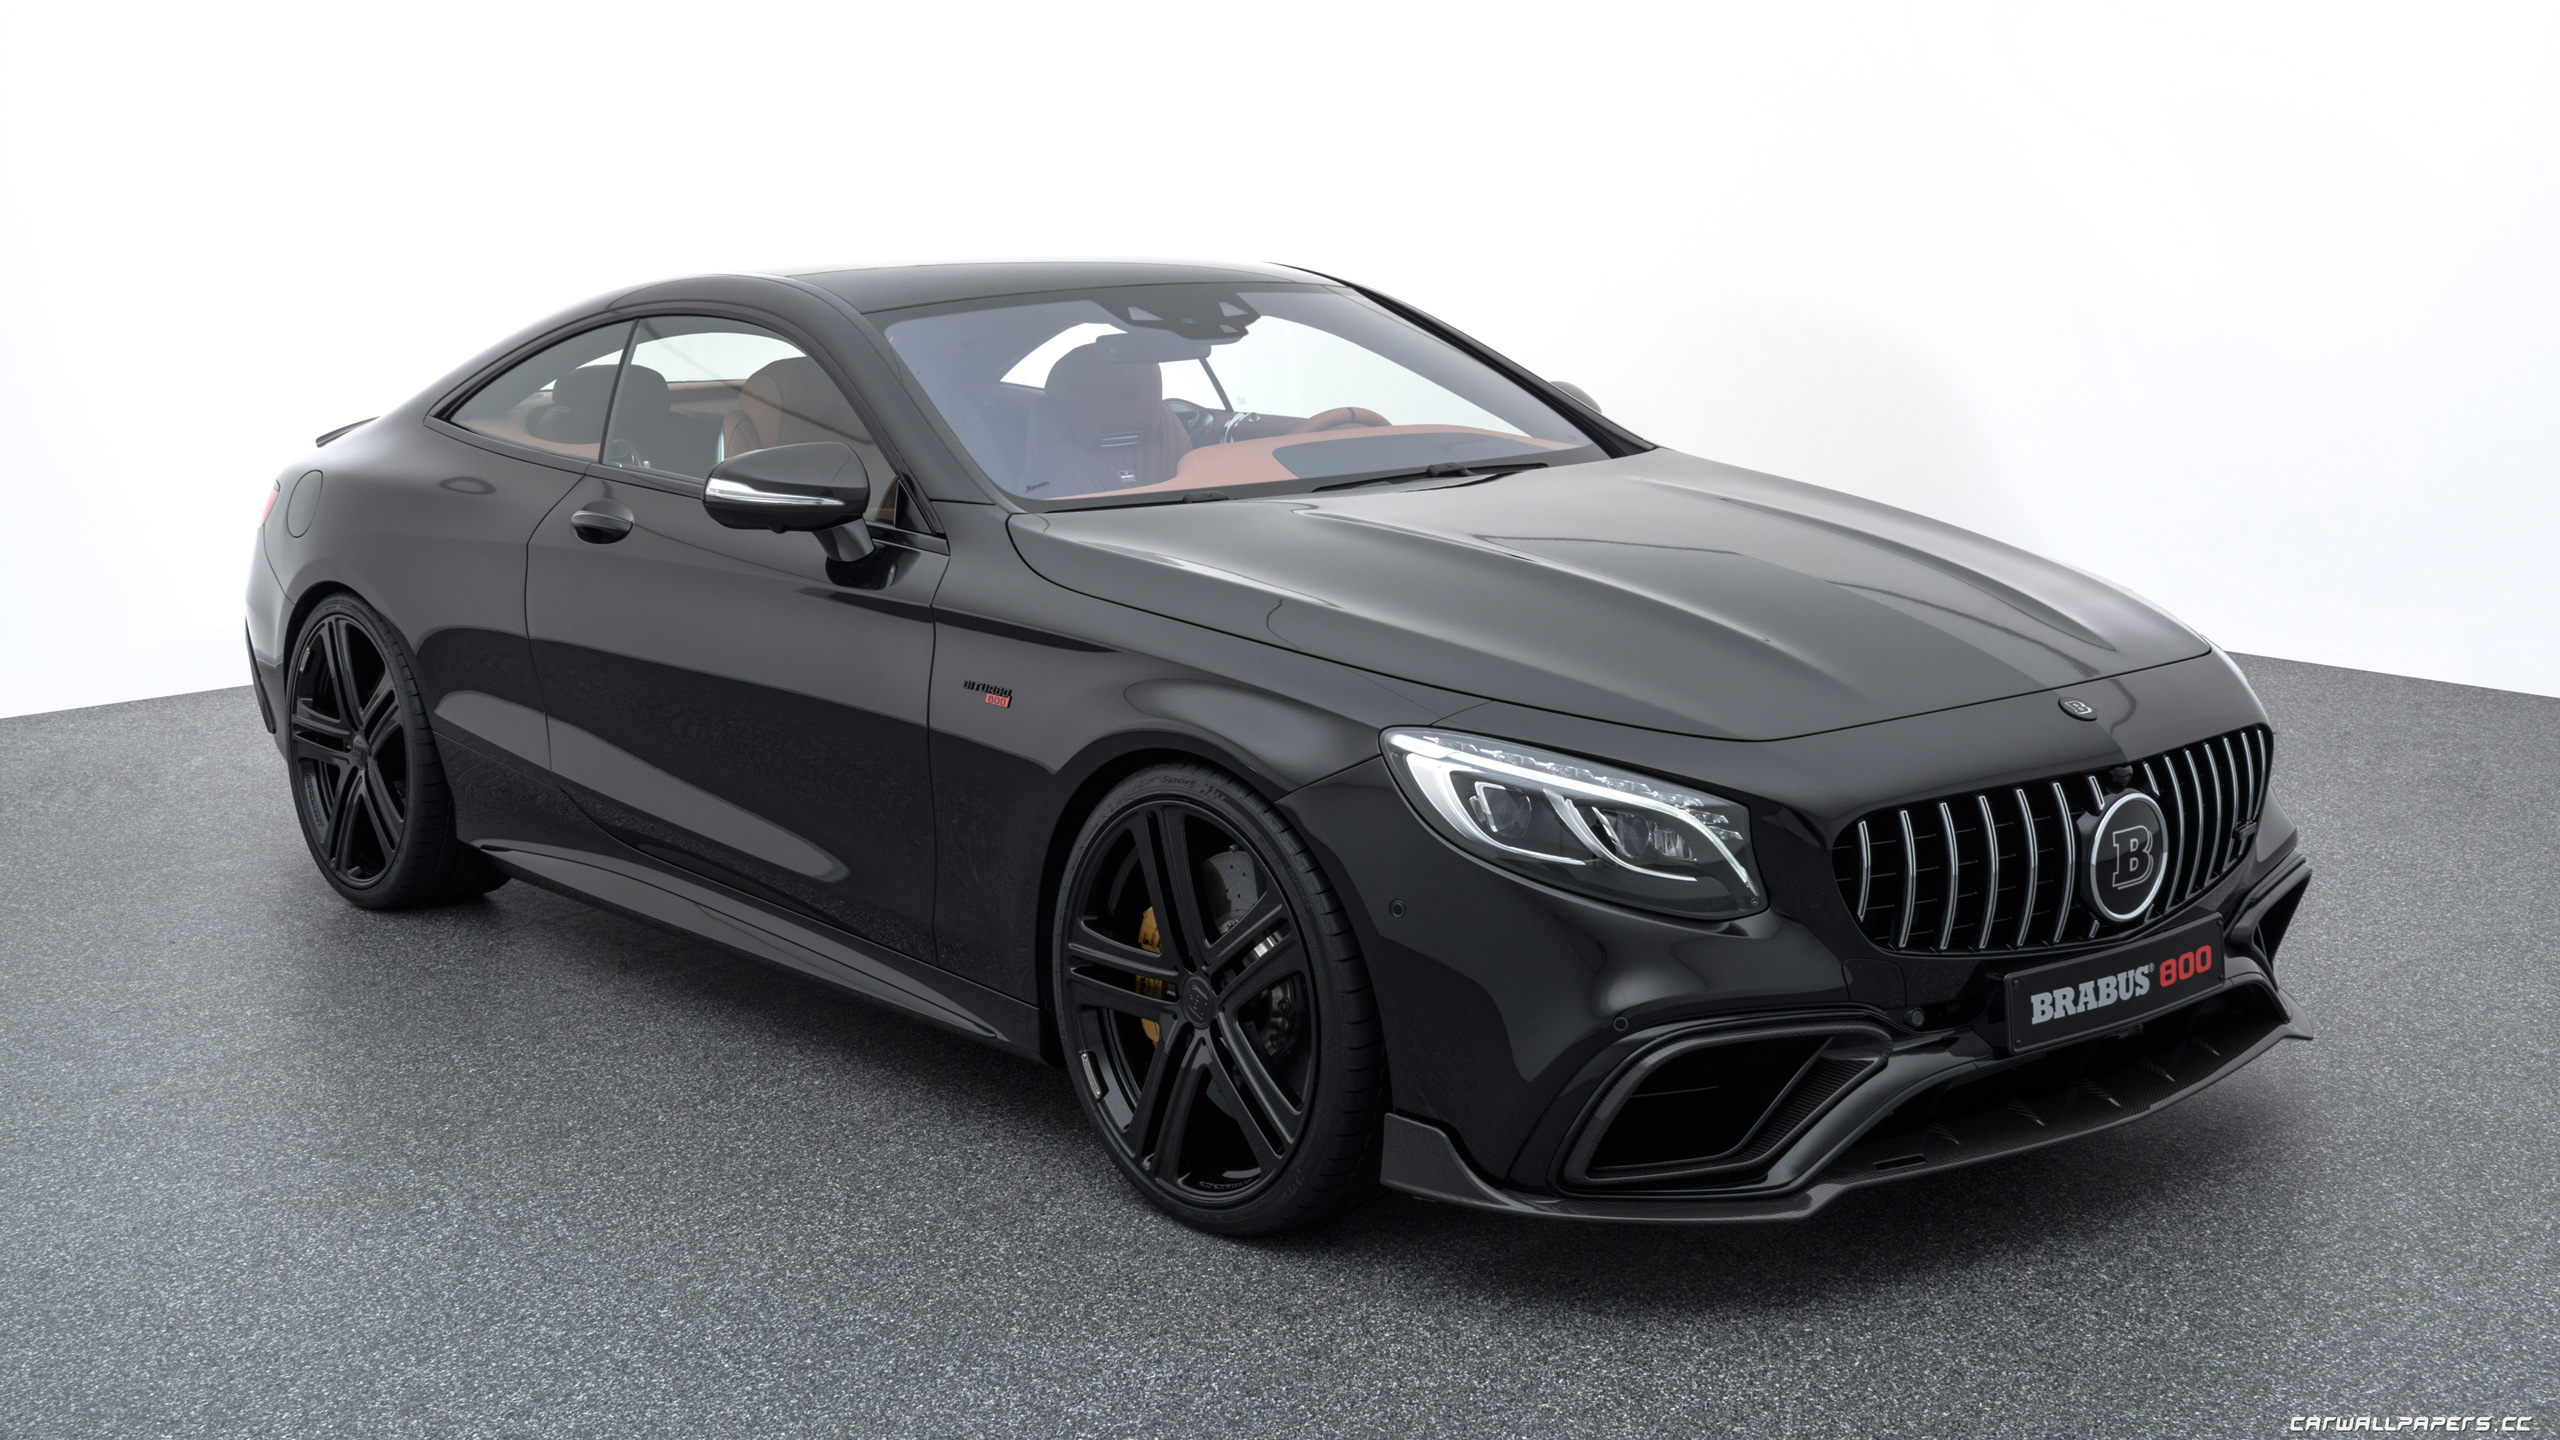 Brabus 800 Coupe Mercedes-amg S 63 4matic Coupe - Brabus 800 S63 Coupe , HD Wallpaper & Backgrounds